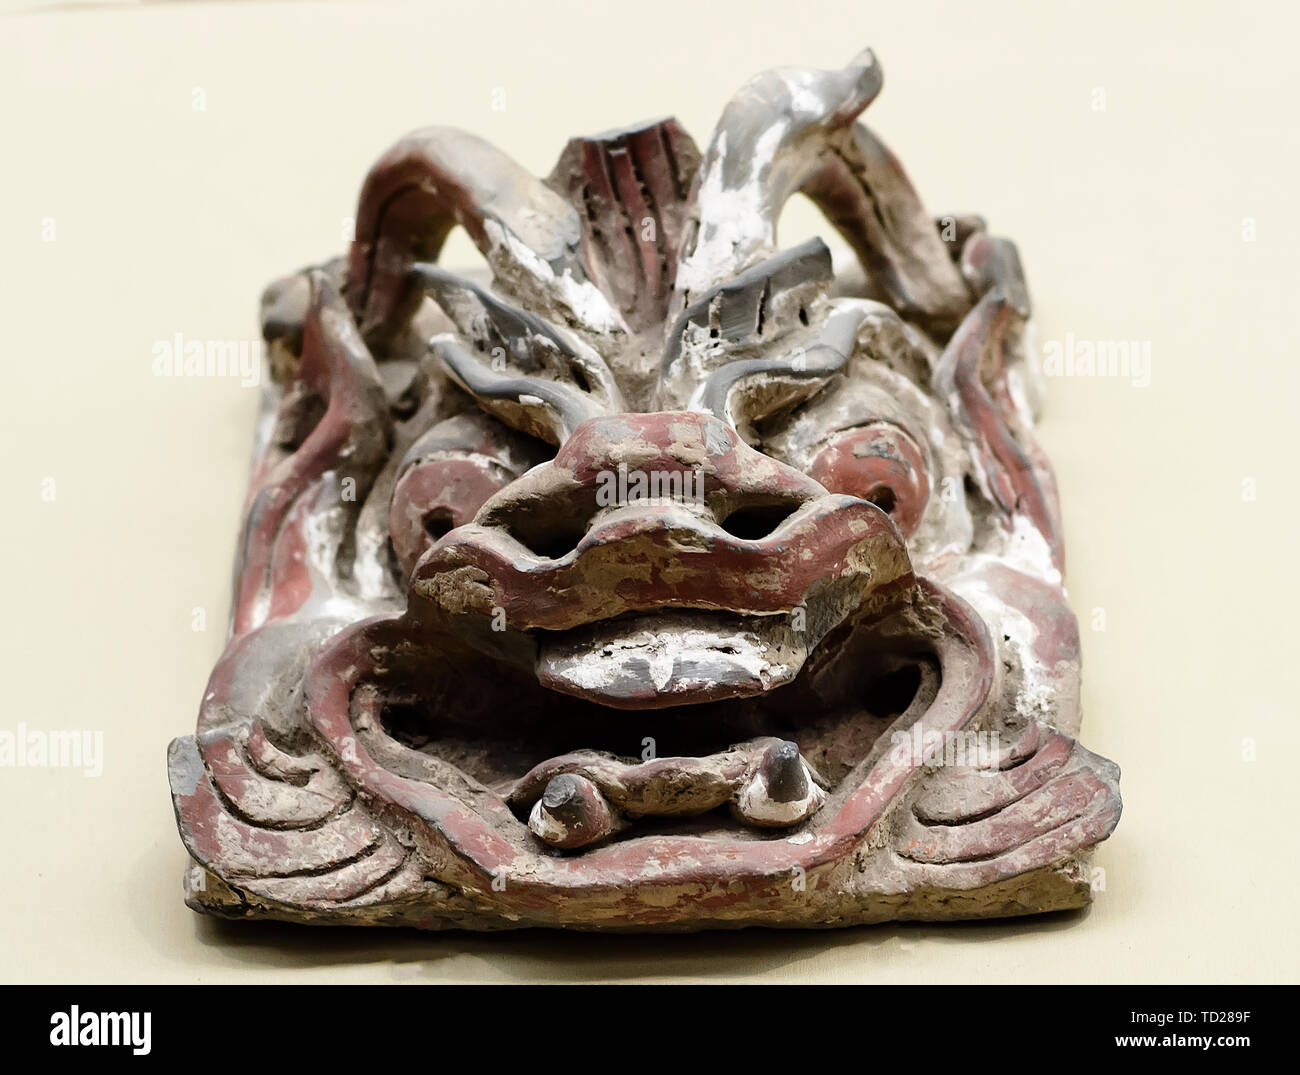 China Shaanxi Museum Datang relics Tang Dynasty cultural relics Hejia village leading animal head pottery brick Stock Photo